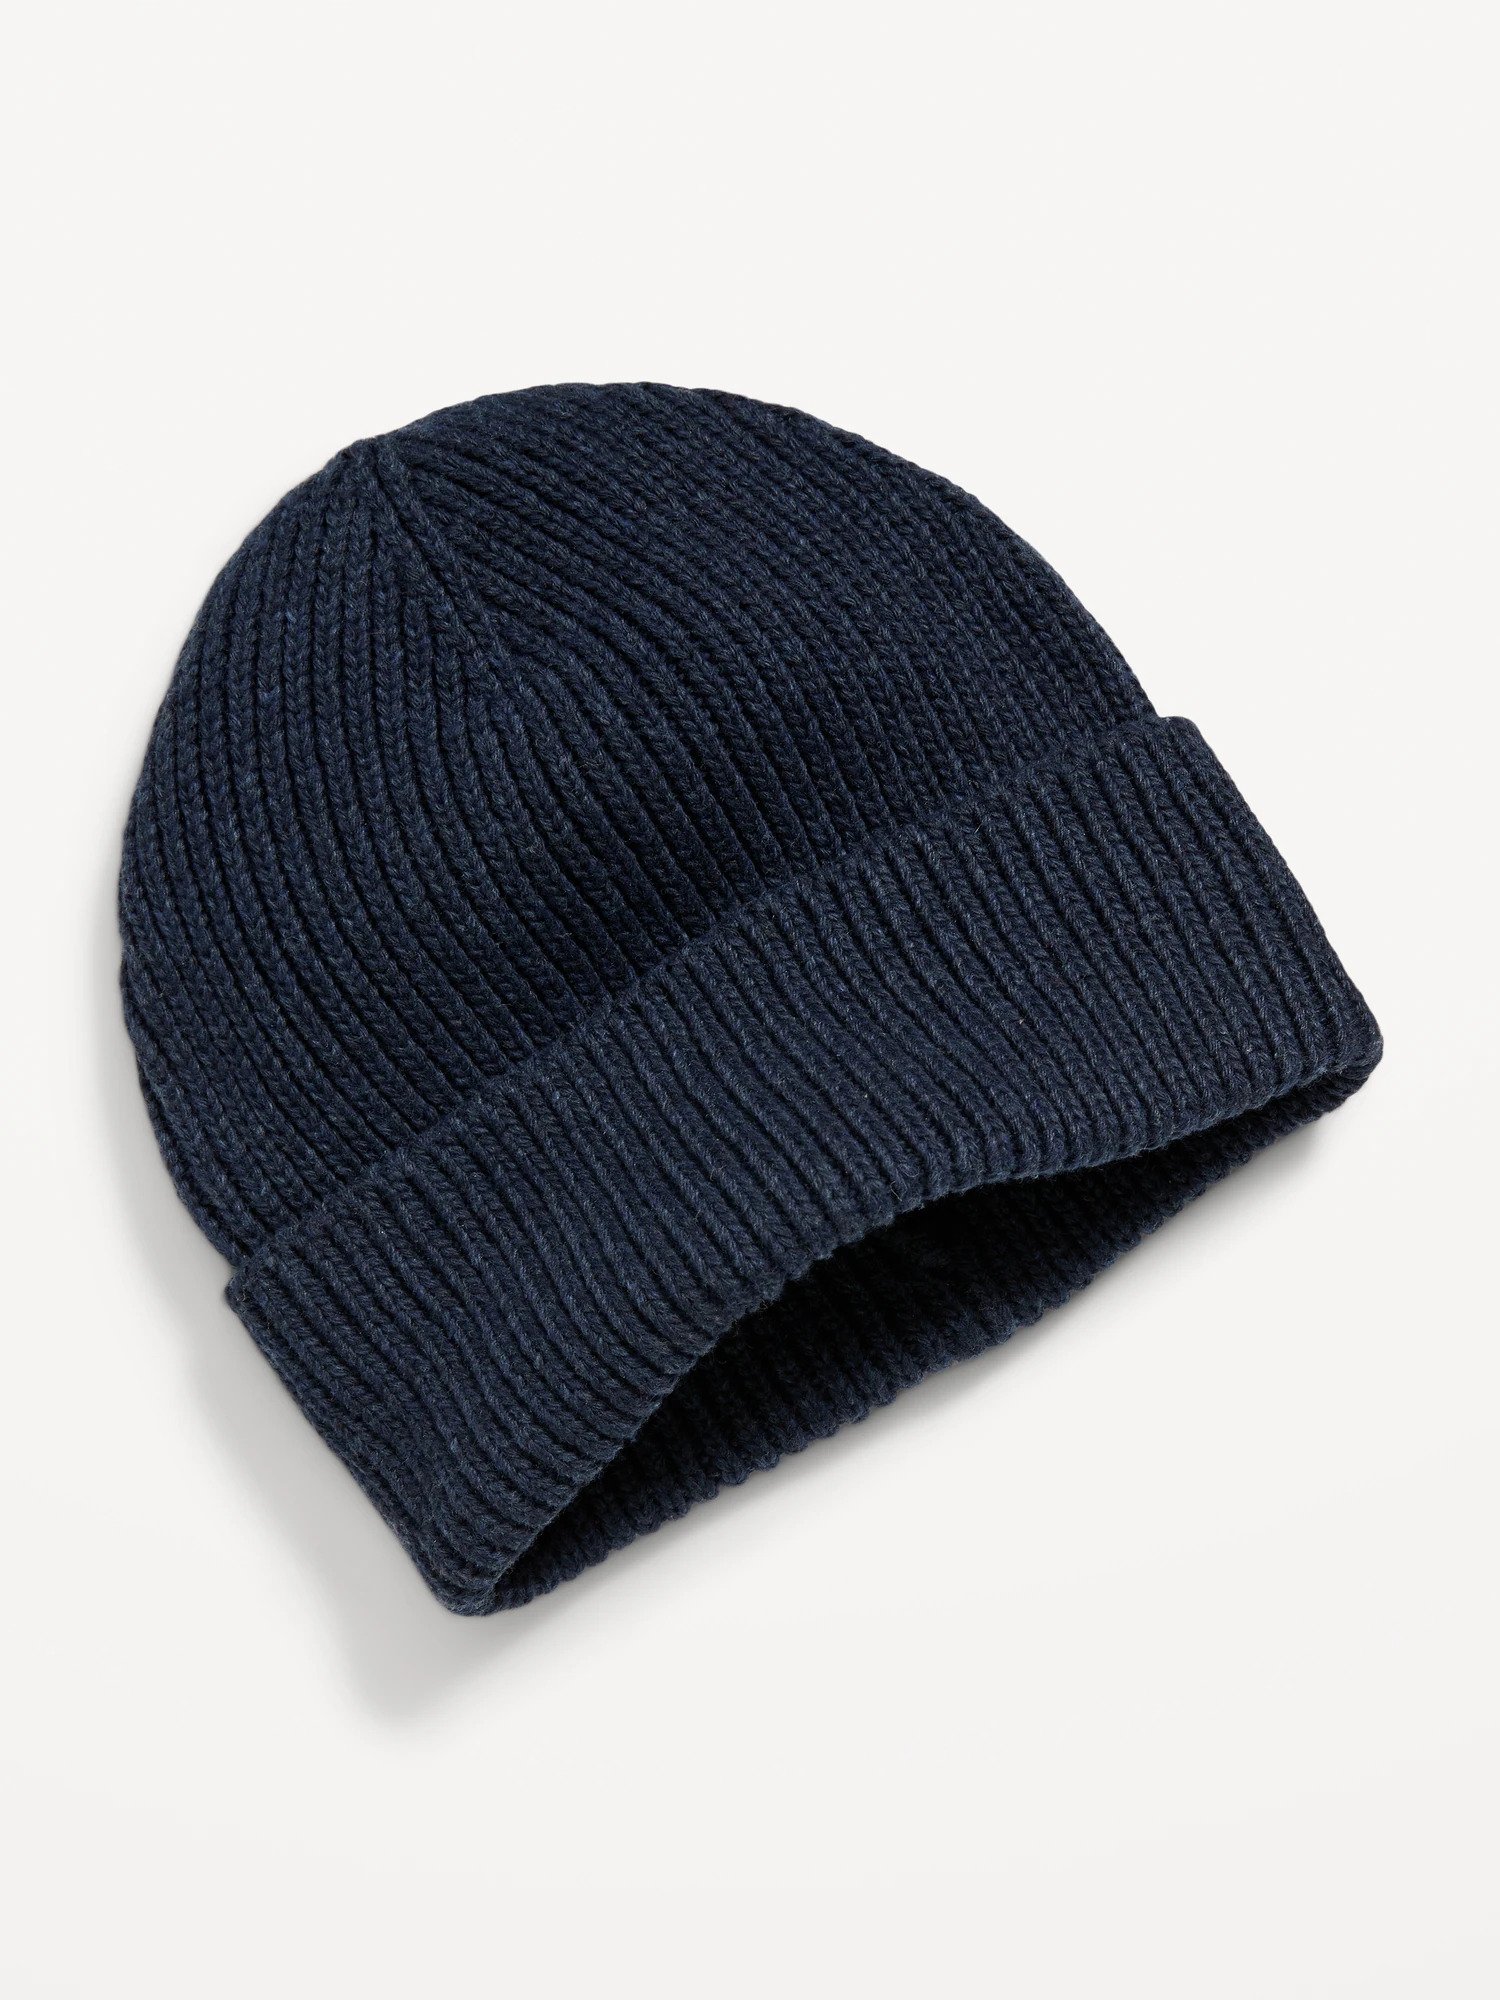    Gender-Neutral Rib-Knit Beanie for Adults, P895   